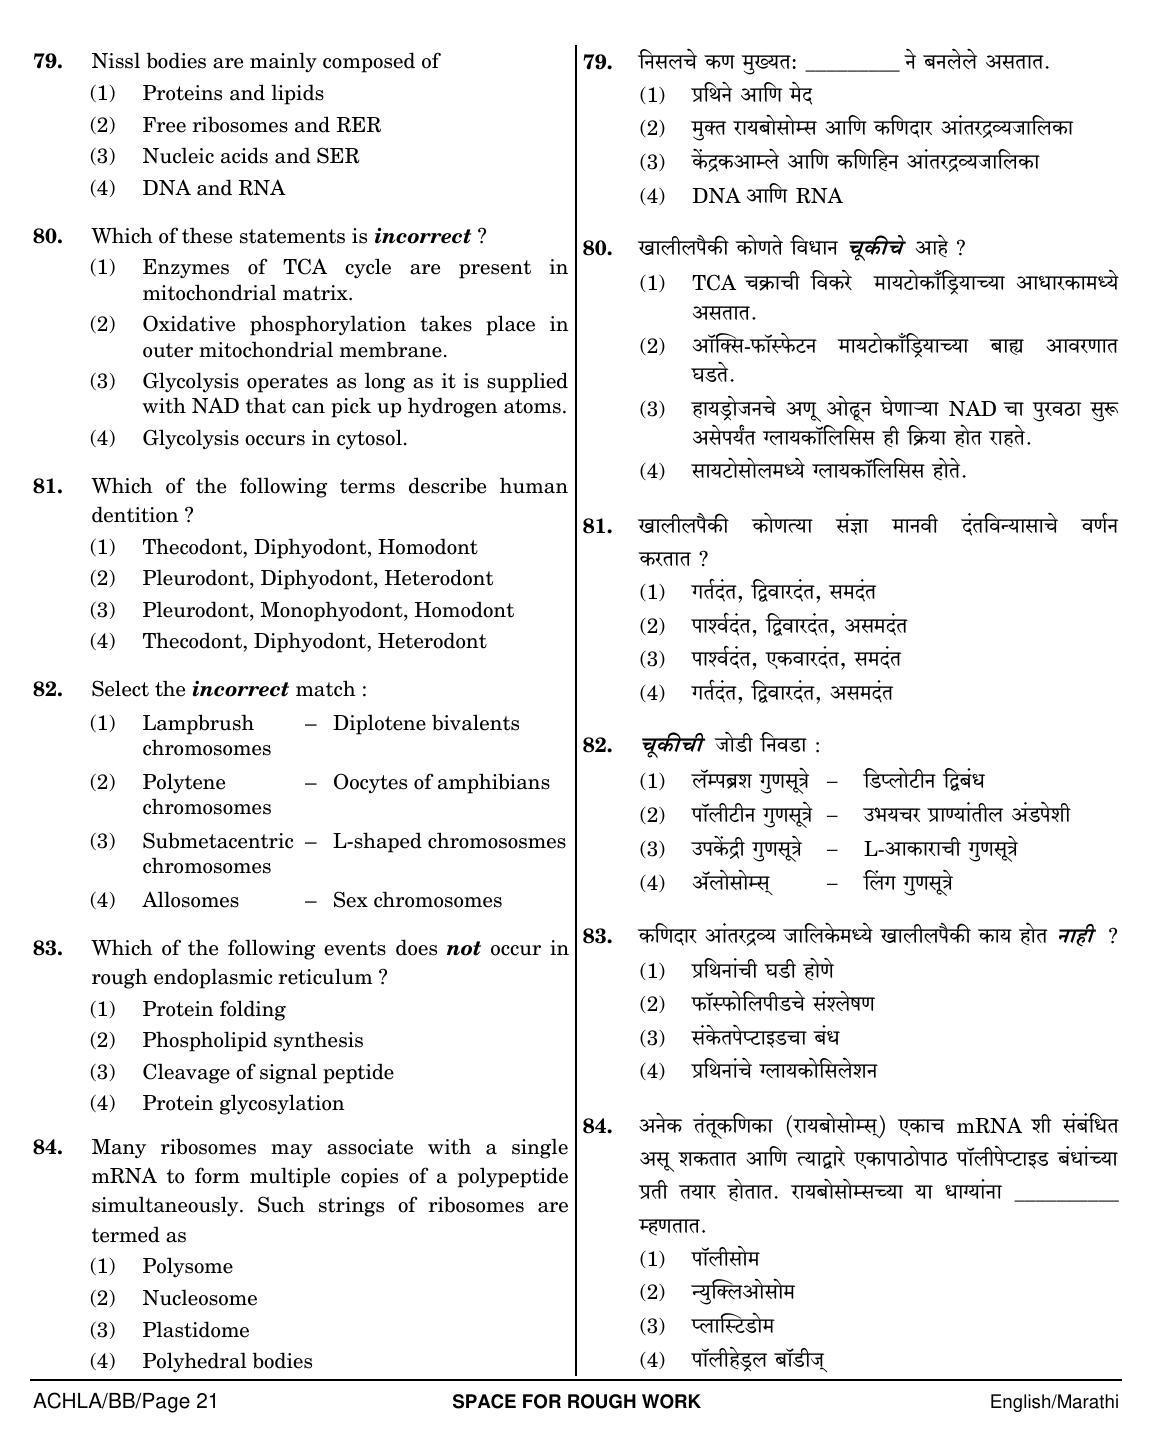 NEET Marathi BB 2018 Question Paper - Page 21